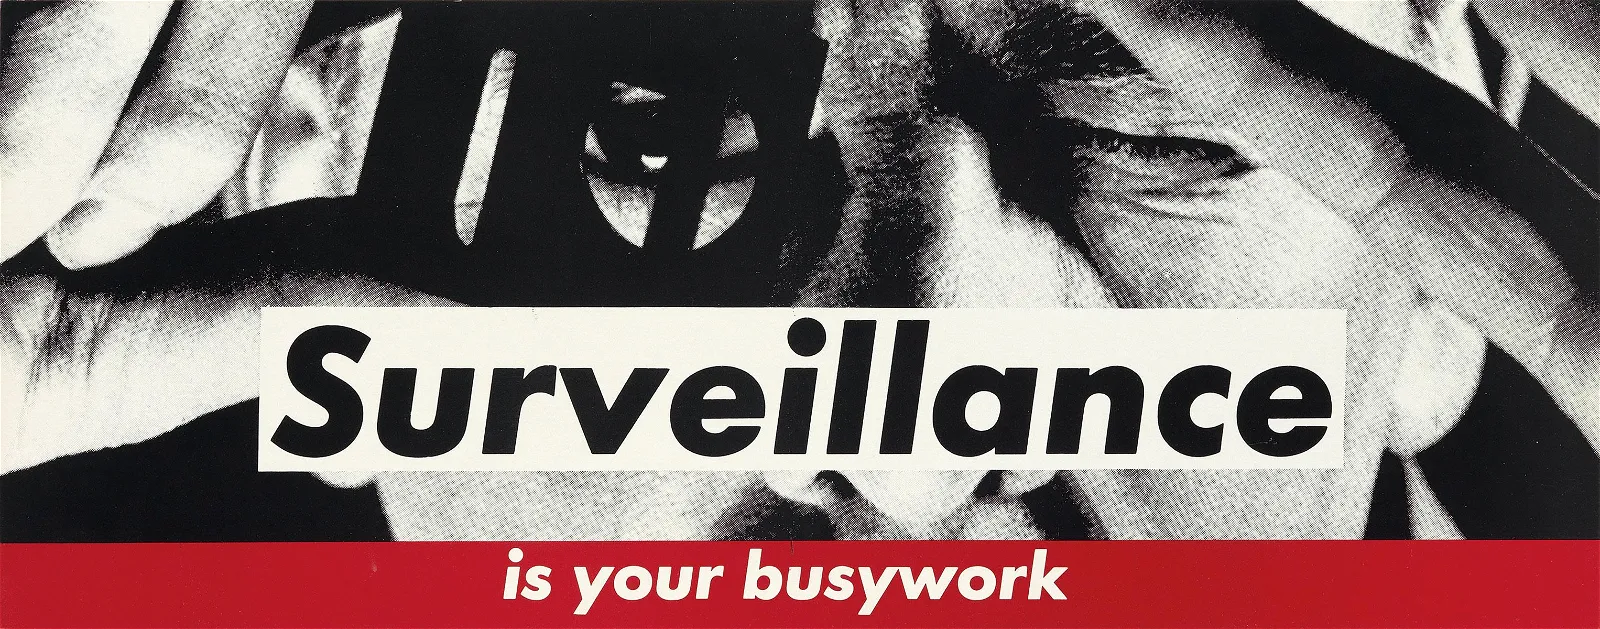 Untitled (Surveillance is your busywork).